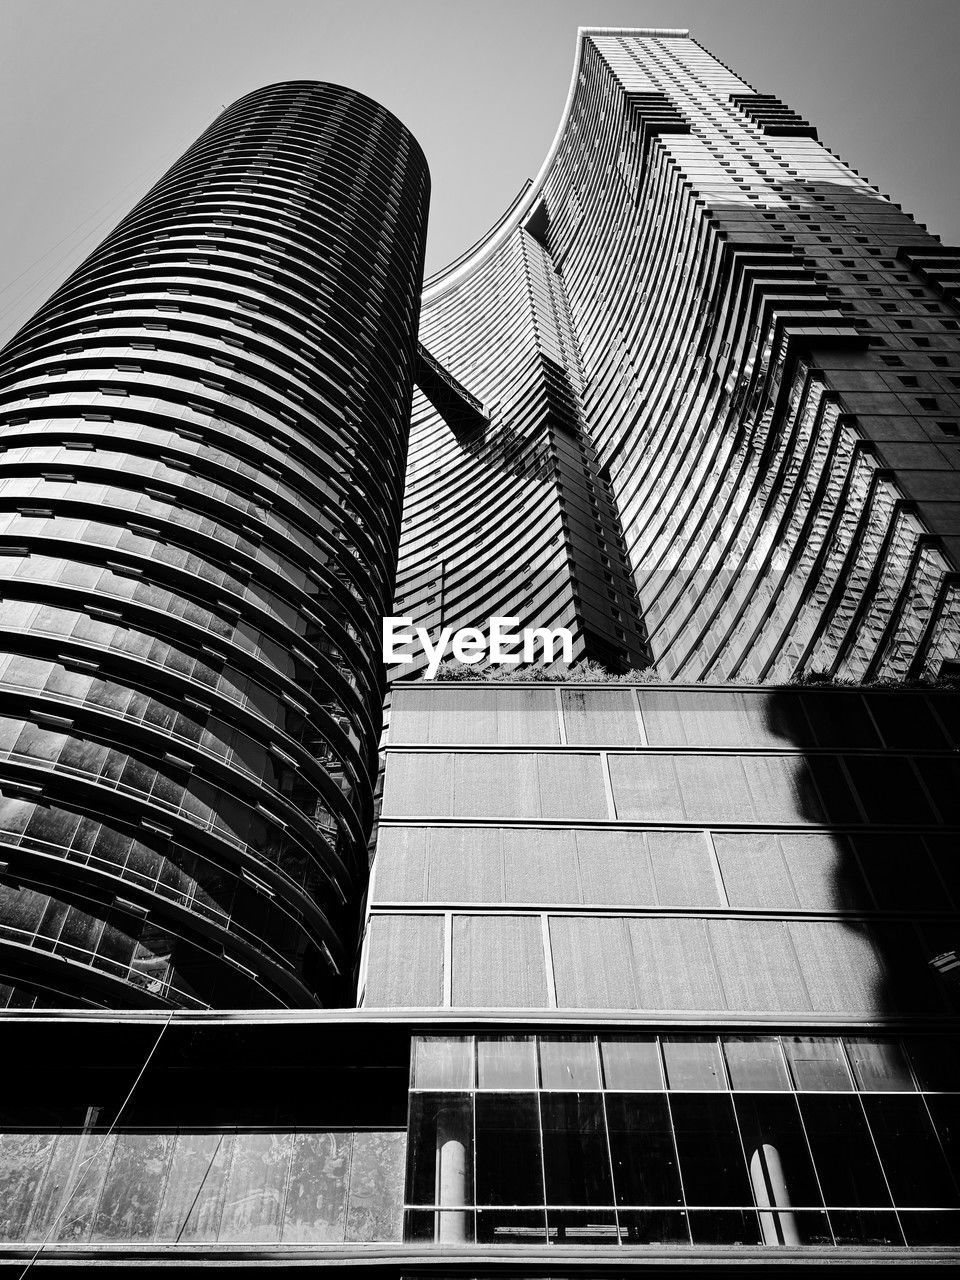 architecture, built structure, black and white, building exterior, monochrome, black, skyscraper, office building exterior, building, monochrome photography, city, low angle view, sky, office, line, white, no people, tower, tower block, nature, day, outdoors